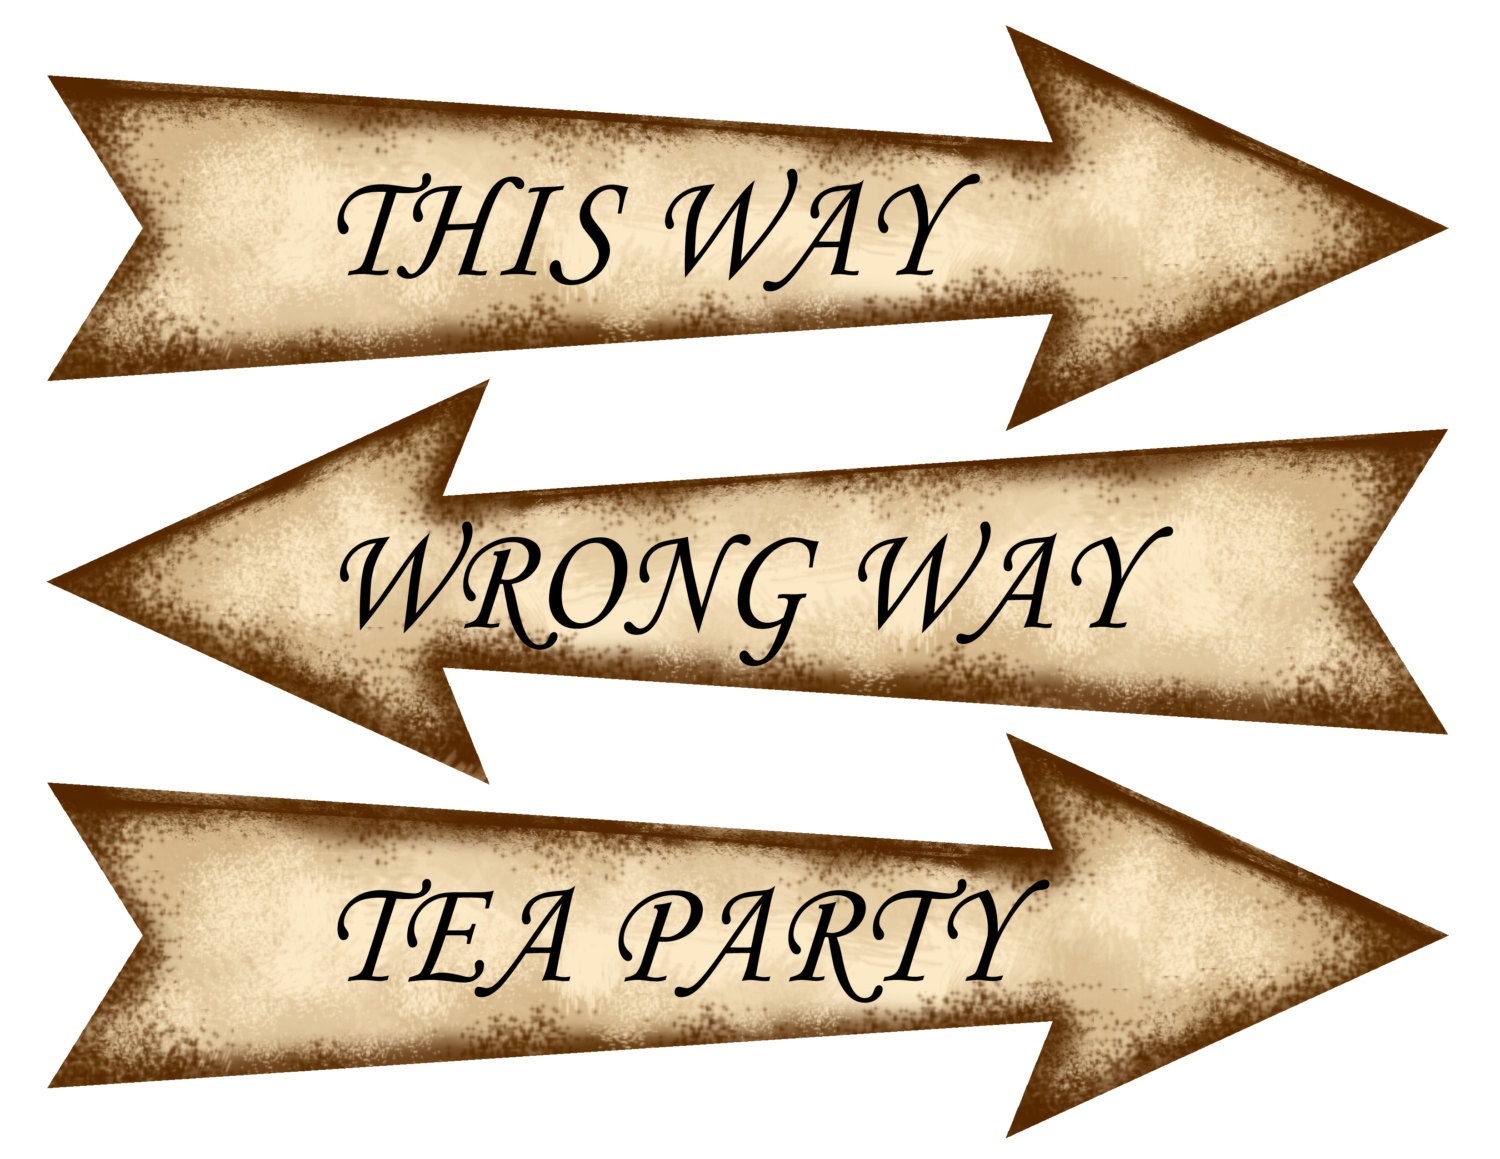 alice-in-wonderland-mad-hatter-tea-party-large-arrow-signs-etsy